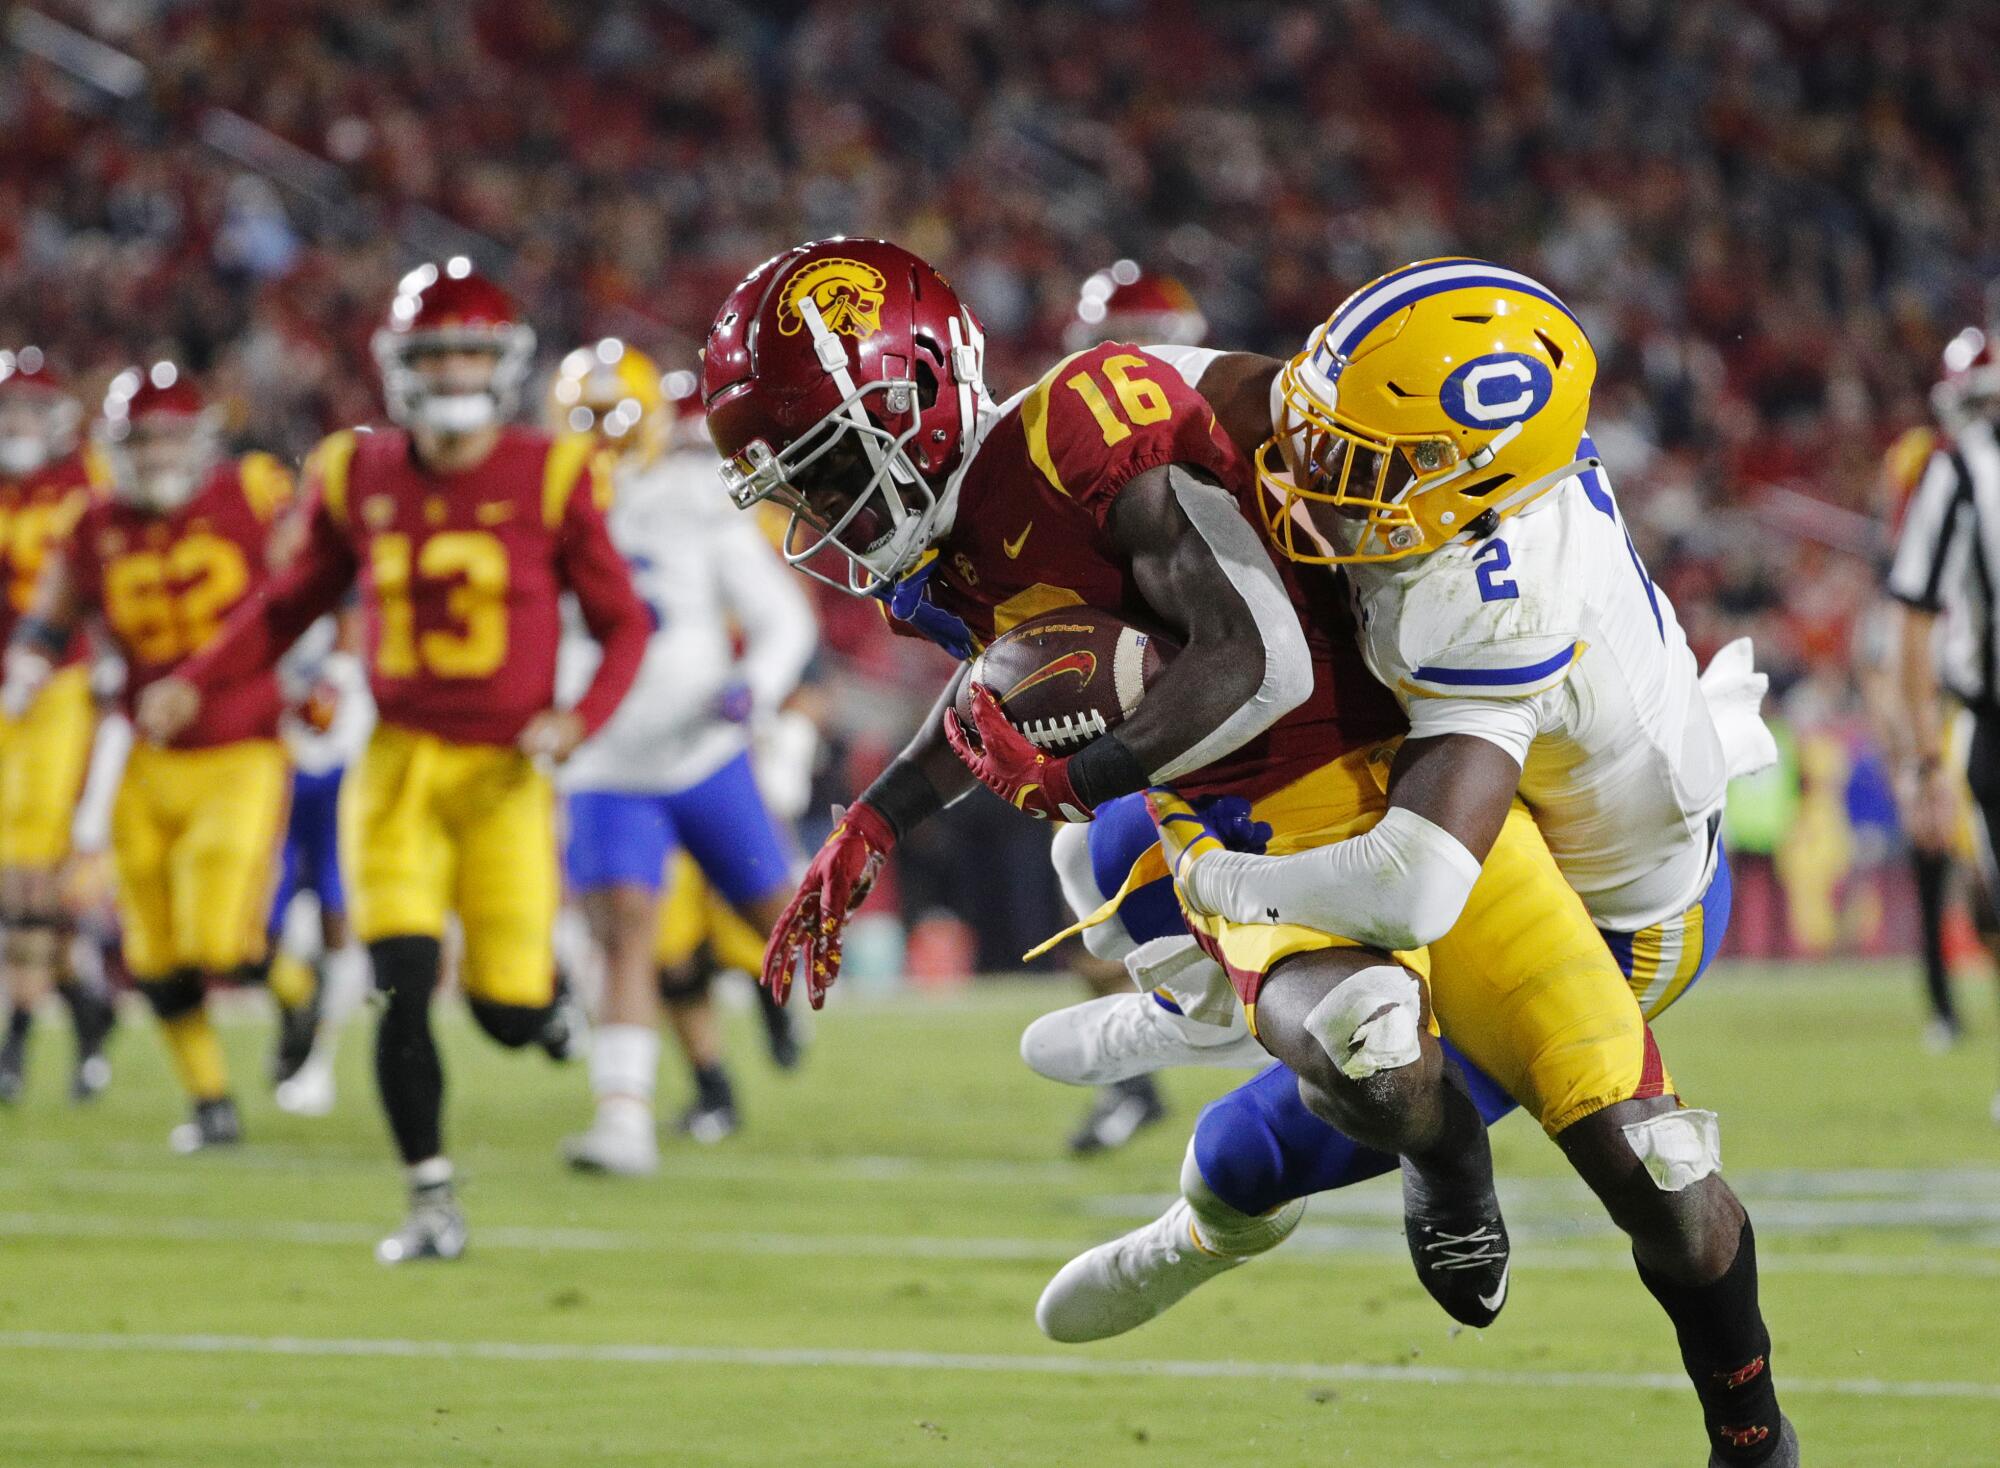 USC wide receiver Tahj Washington is tackled by California safety Craig Woodson.